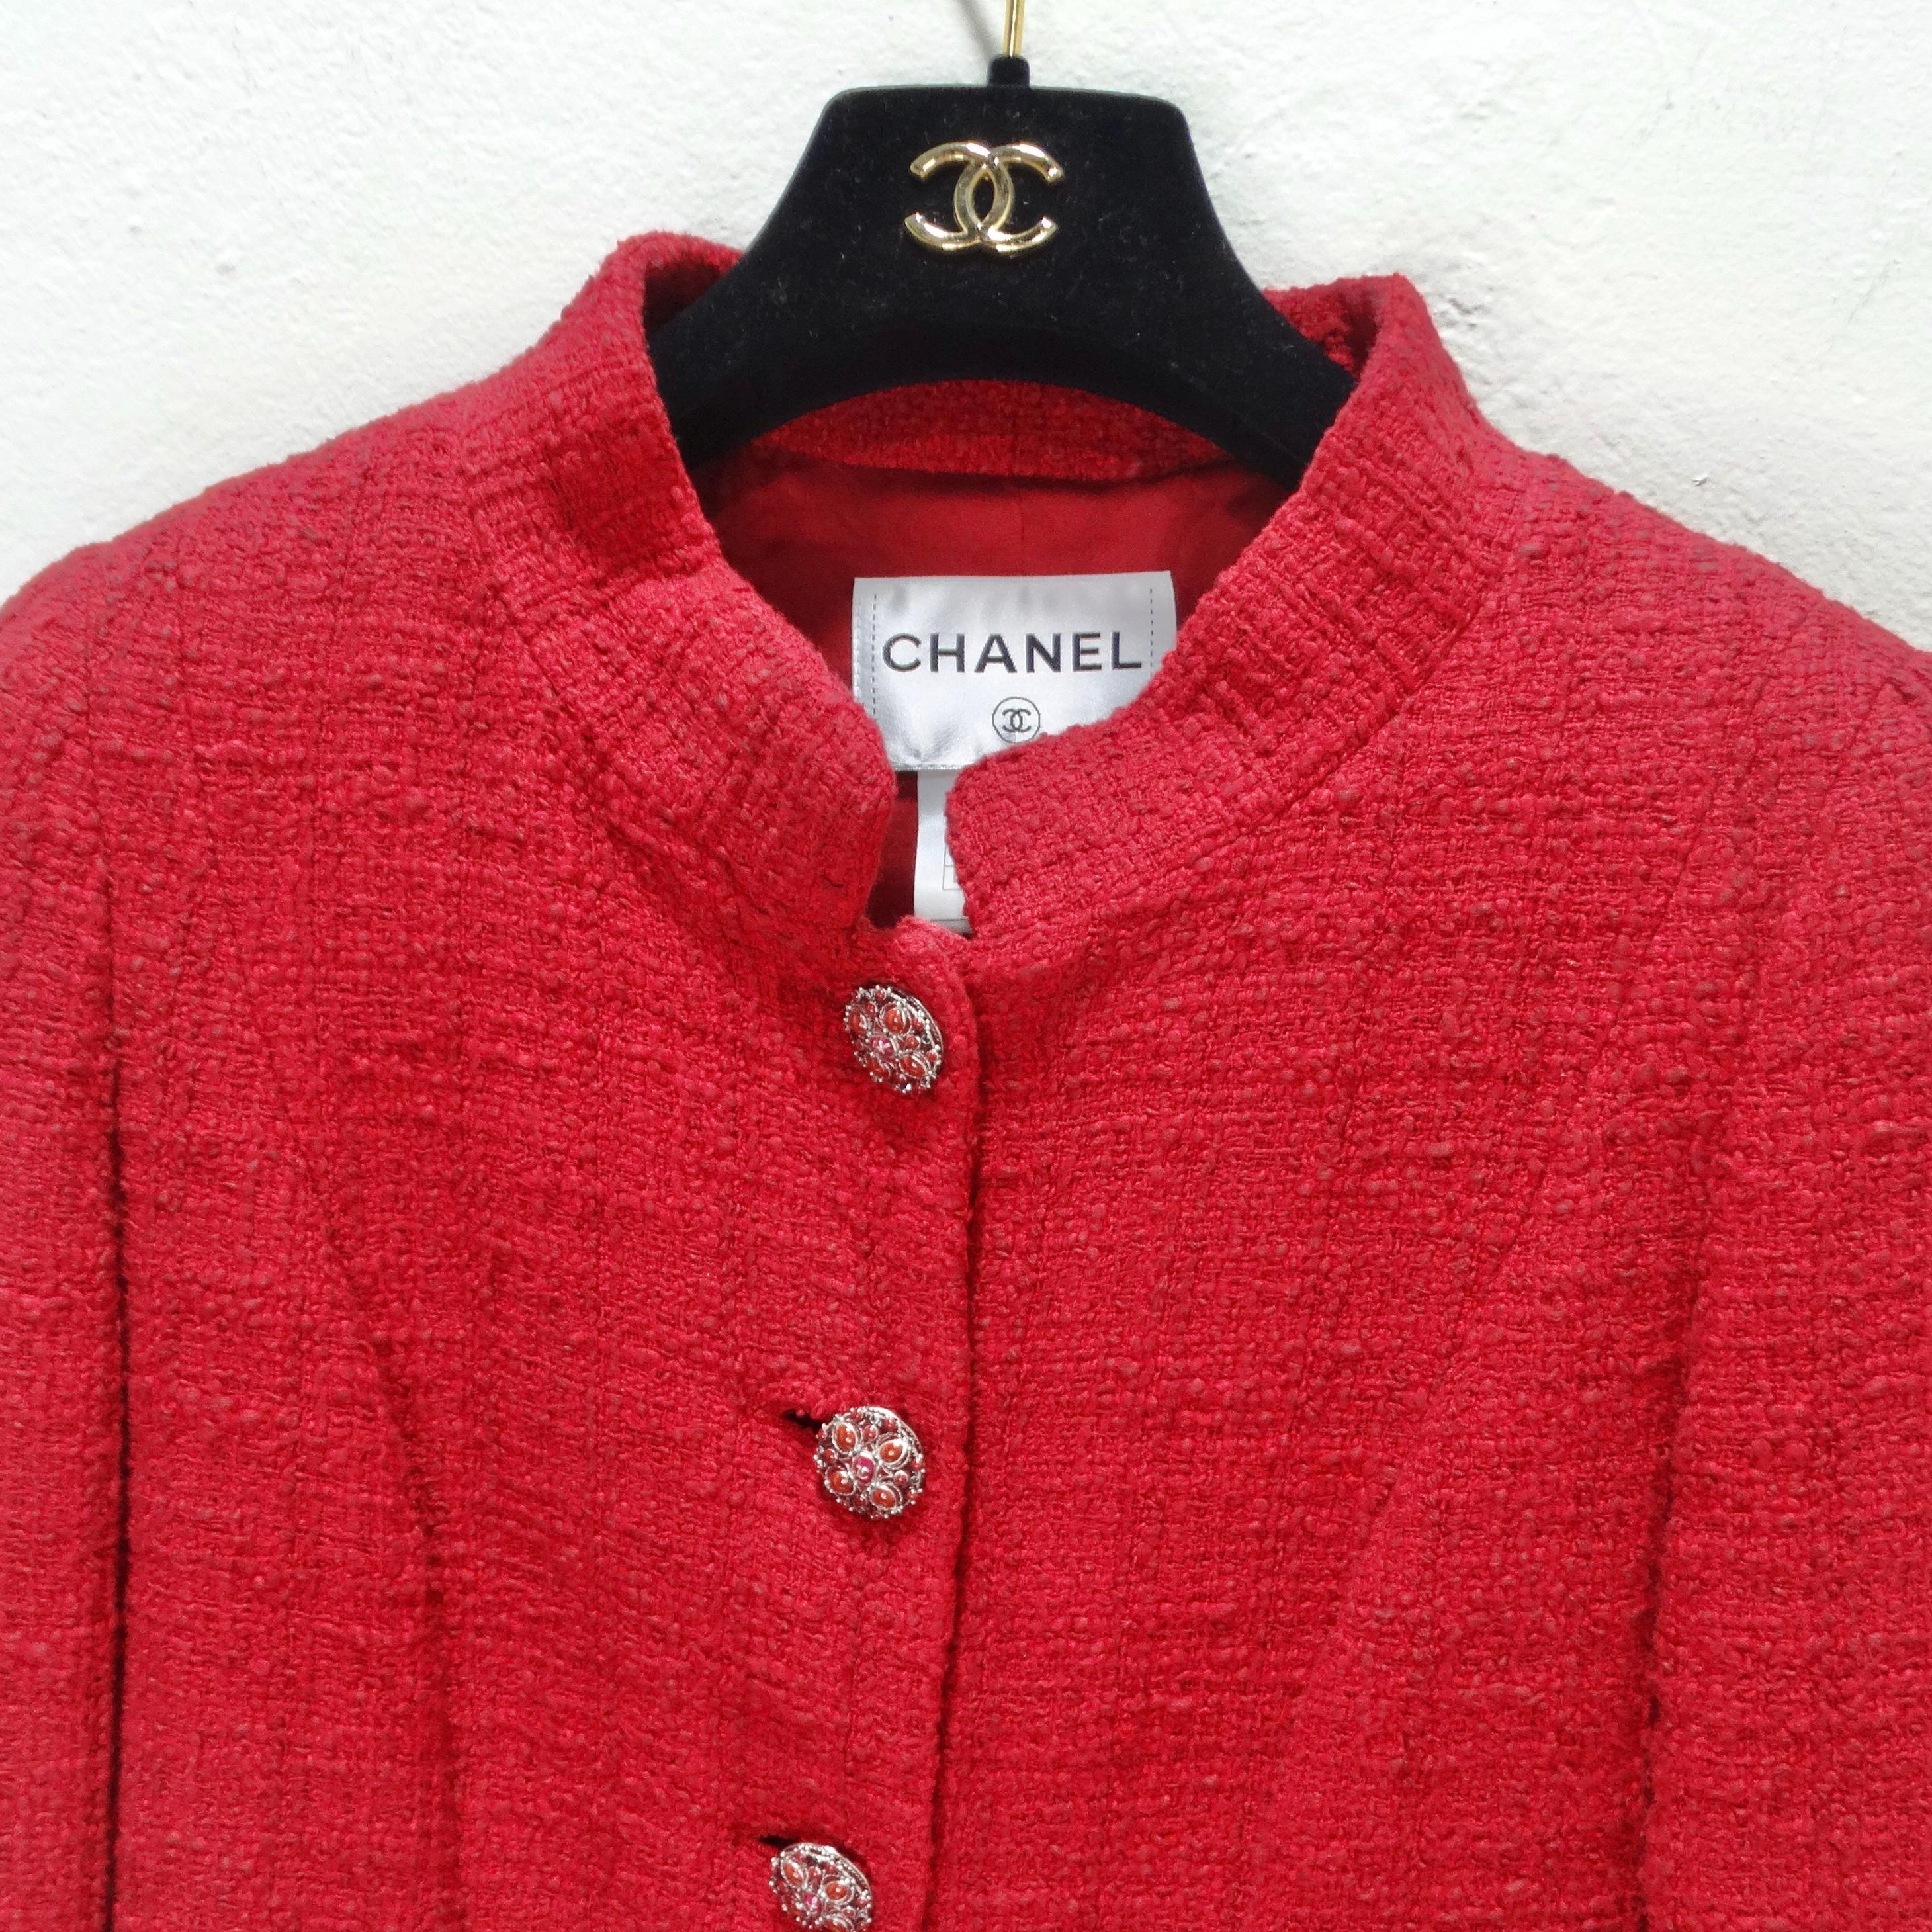 Elevate your fashion game with the epitome of timeless elegance - the Chanel Métiers d'Art Red Tweed Jacket Blazer. This iconic Chanel jacket is more than a garment; it's a masterpiece of haute couture. Crafted from the finest Maison Lesage red